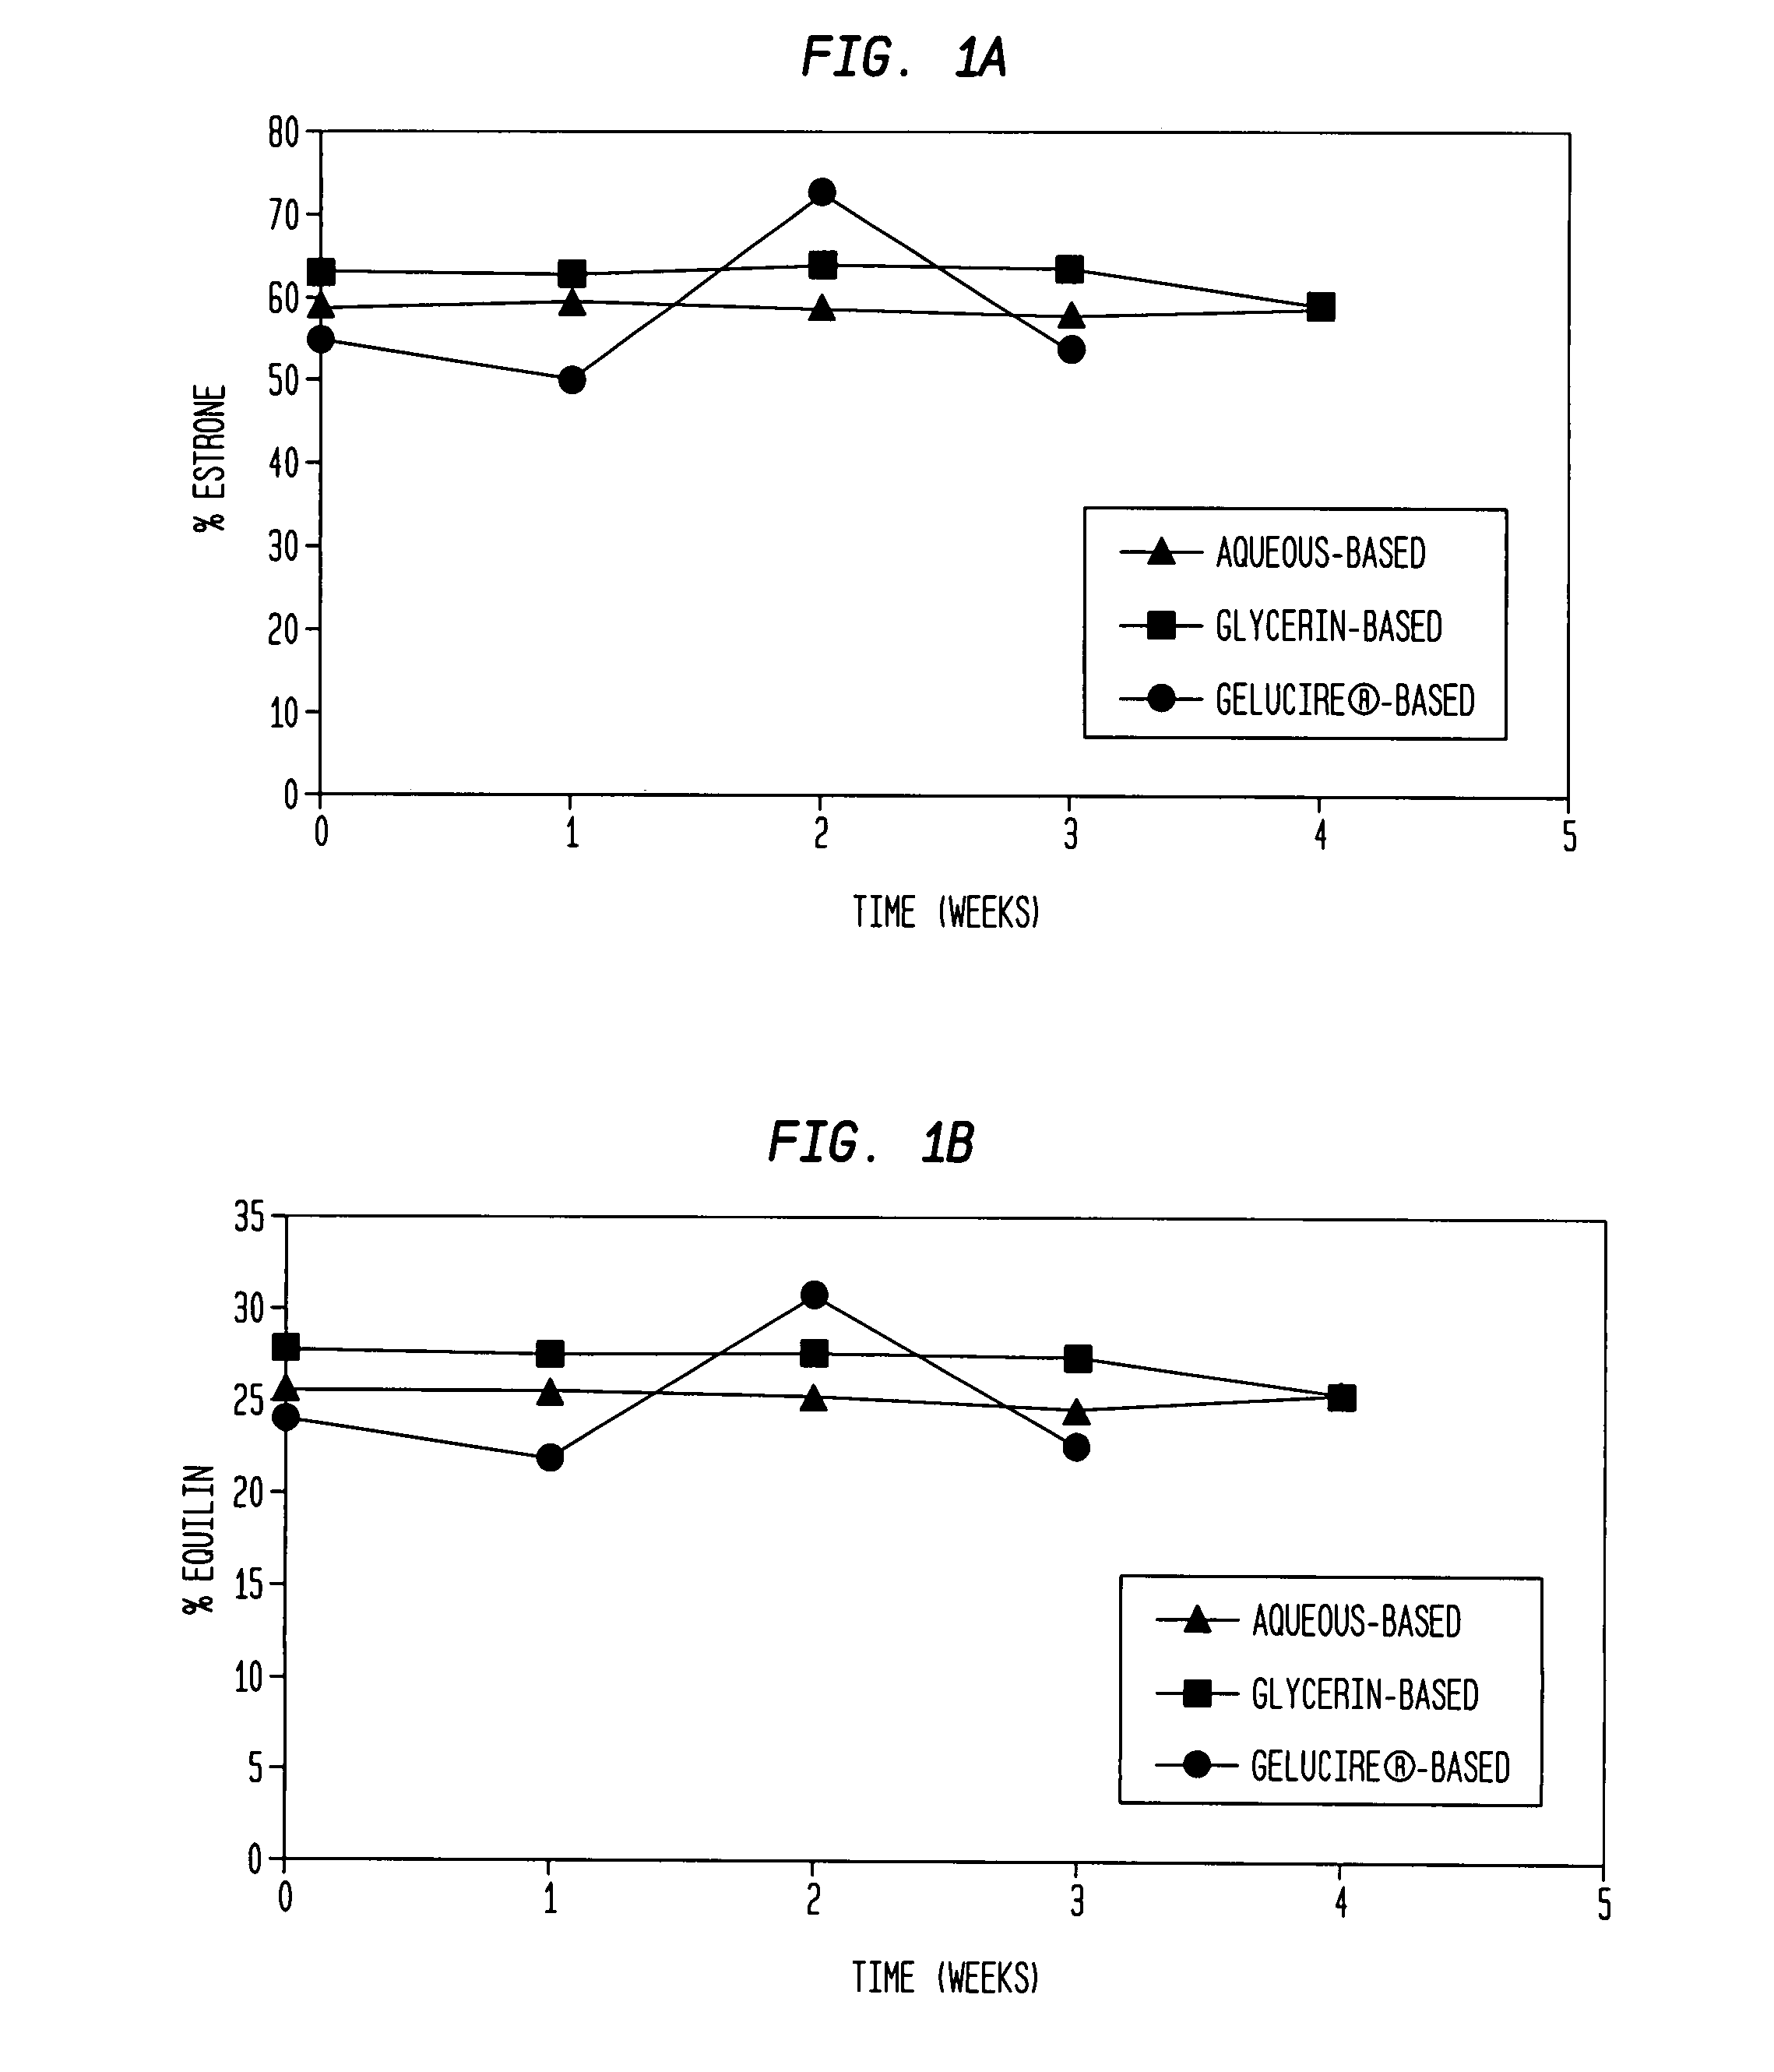 Conjugated estrogen compositions, applicators, kits, and methods of making and use thereof